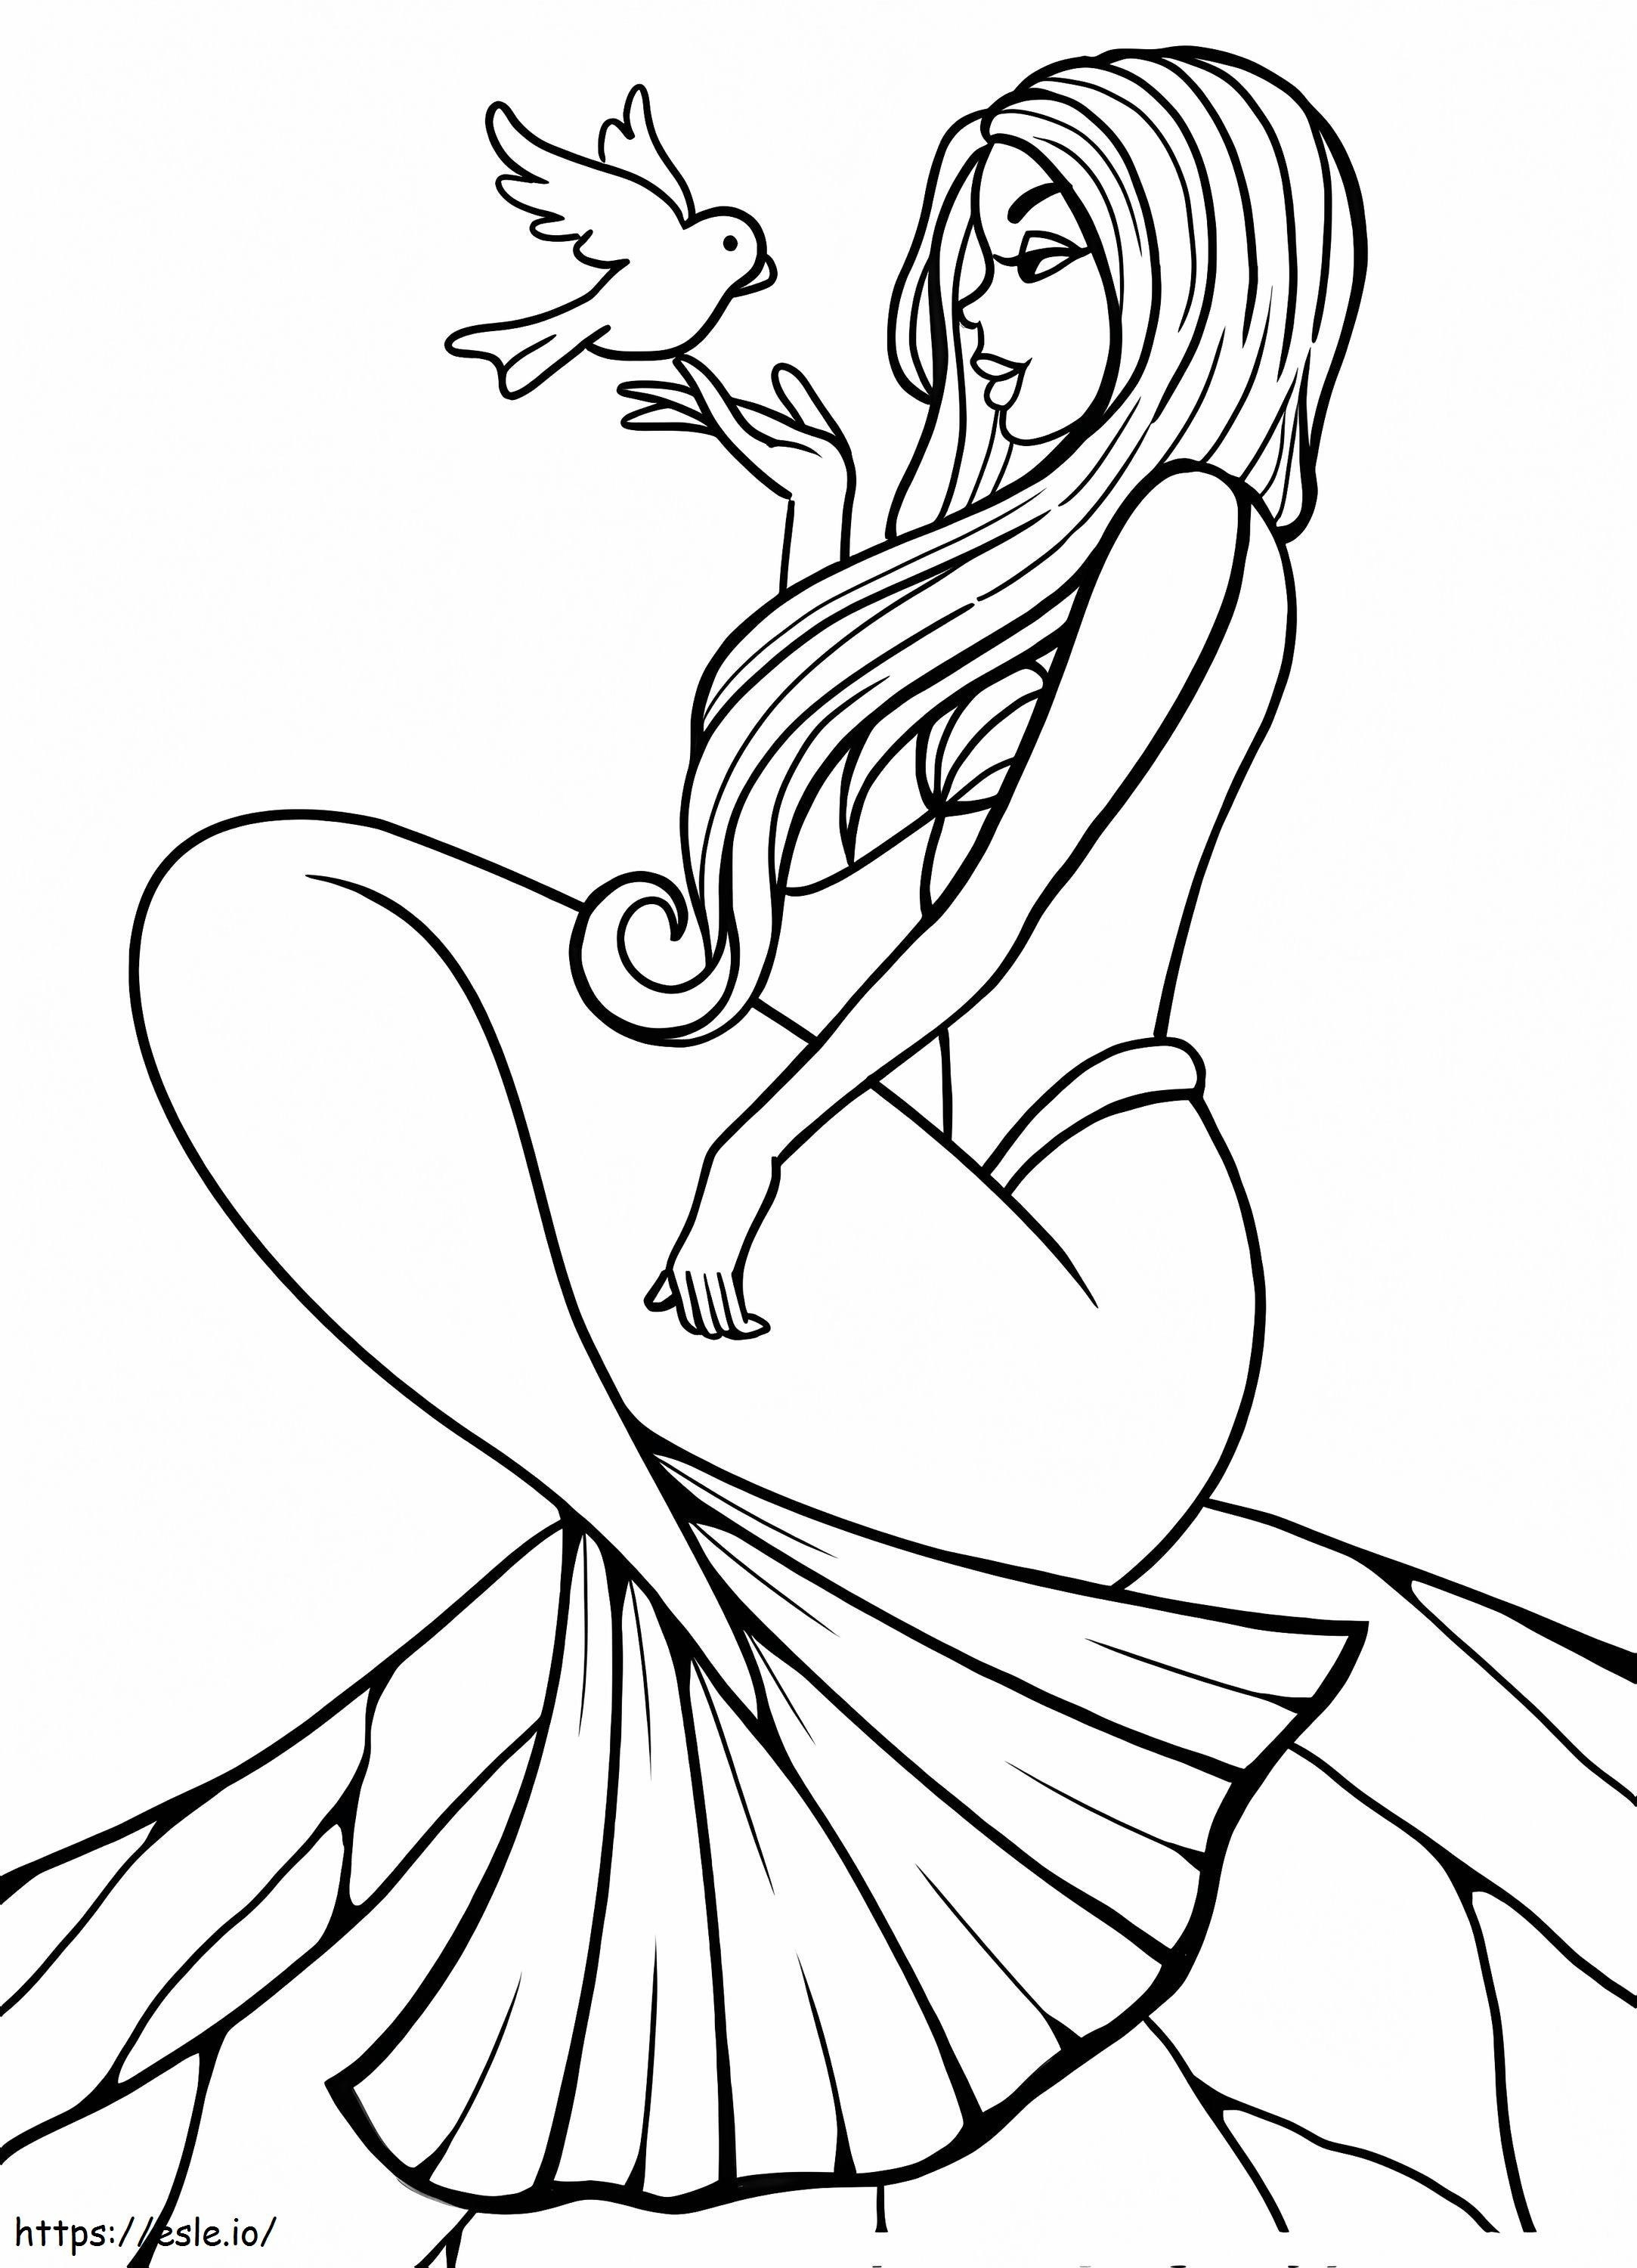 Mermaid And A Bird coloring page